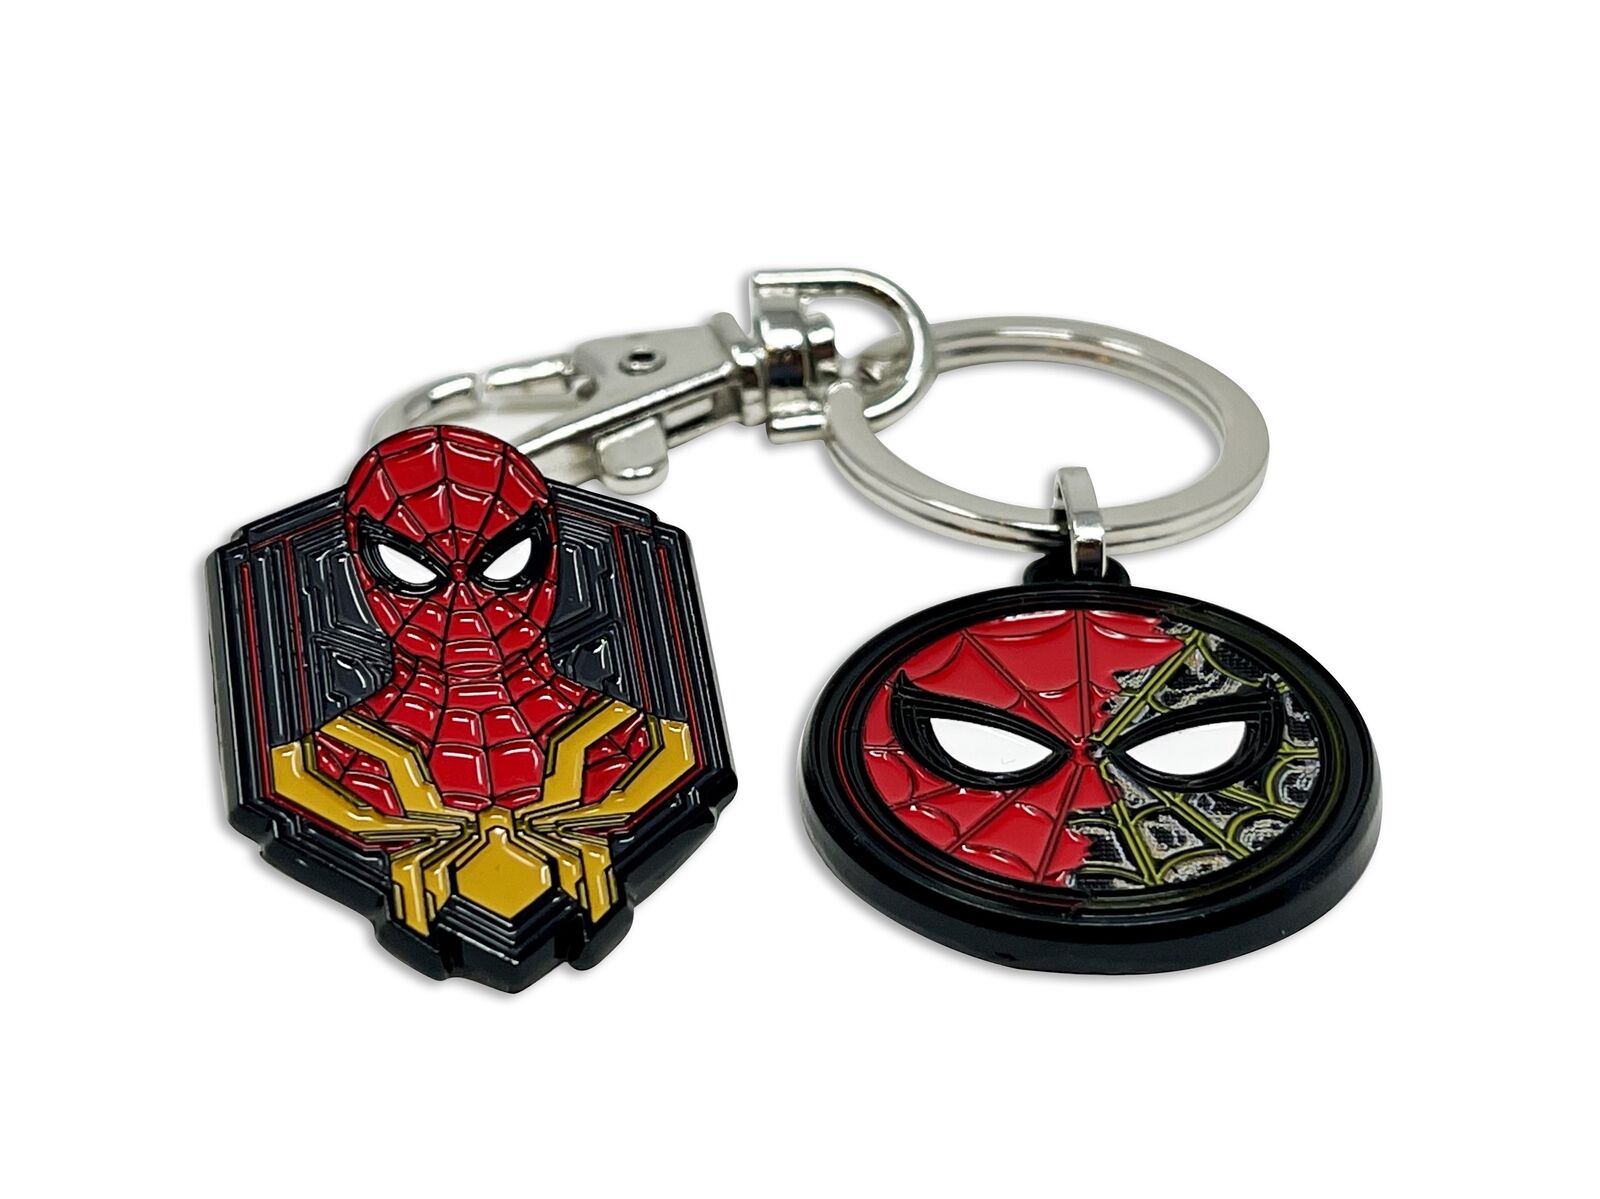 COMBO DEAL: SPIDER-MAN NO WAY HOME SPLIT MASK Combo KEYCHAIN & PIN SET, $19.95